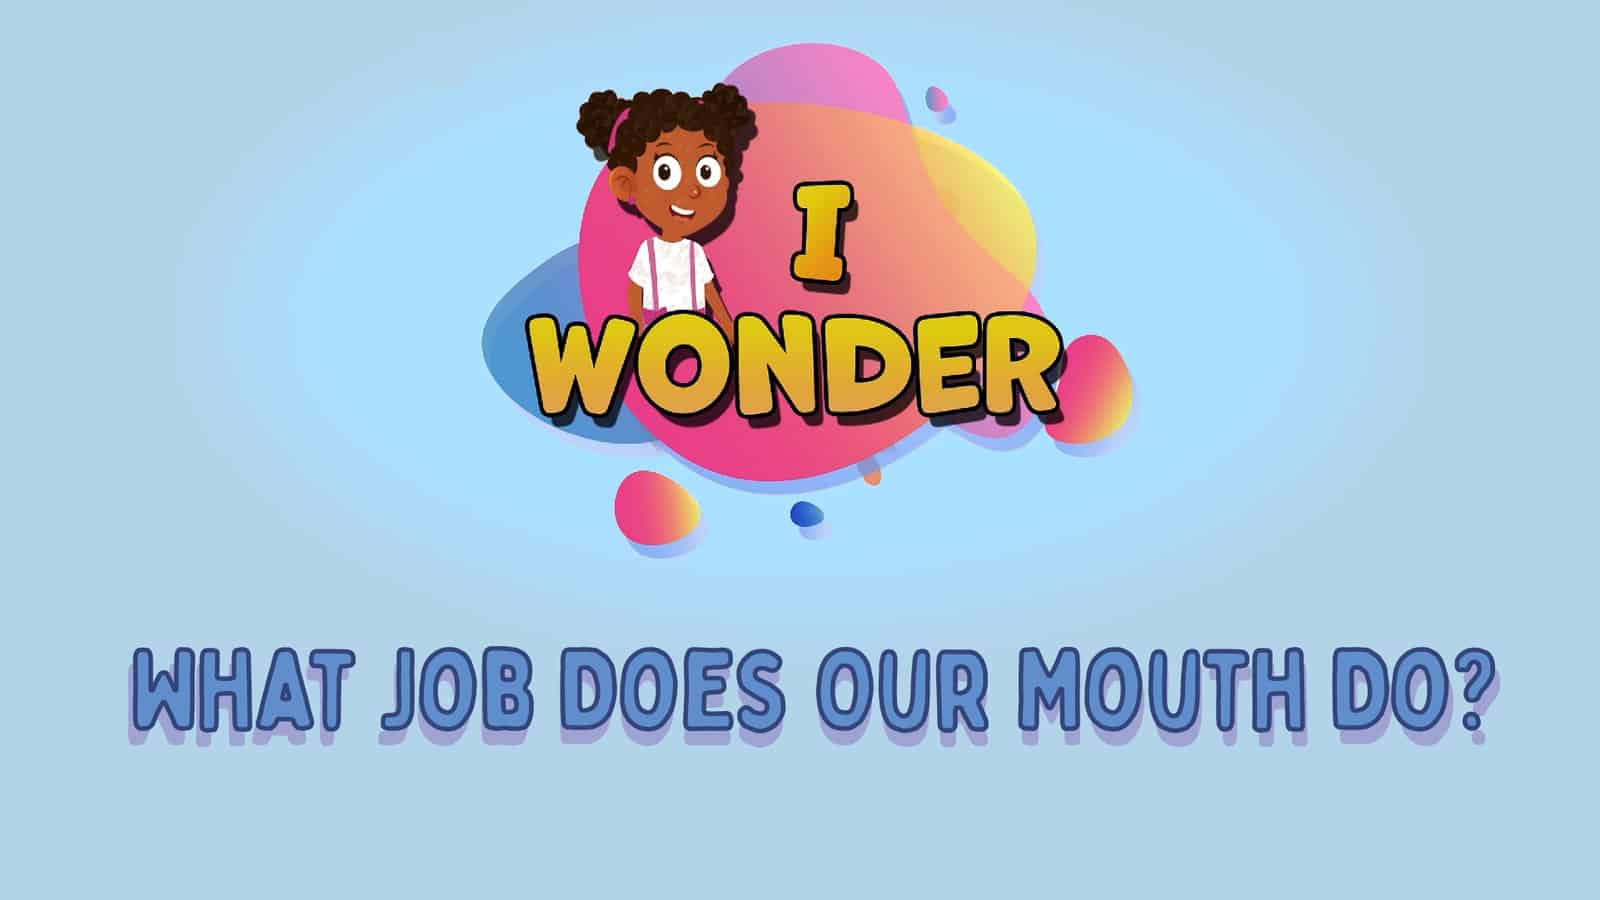 What Job Does Our Mouth Do?